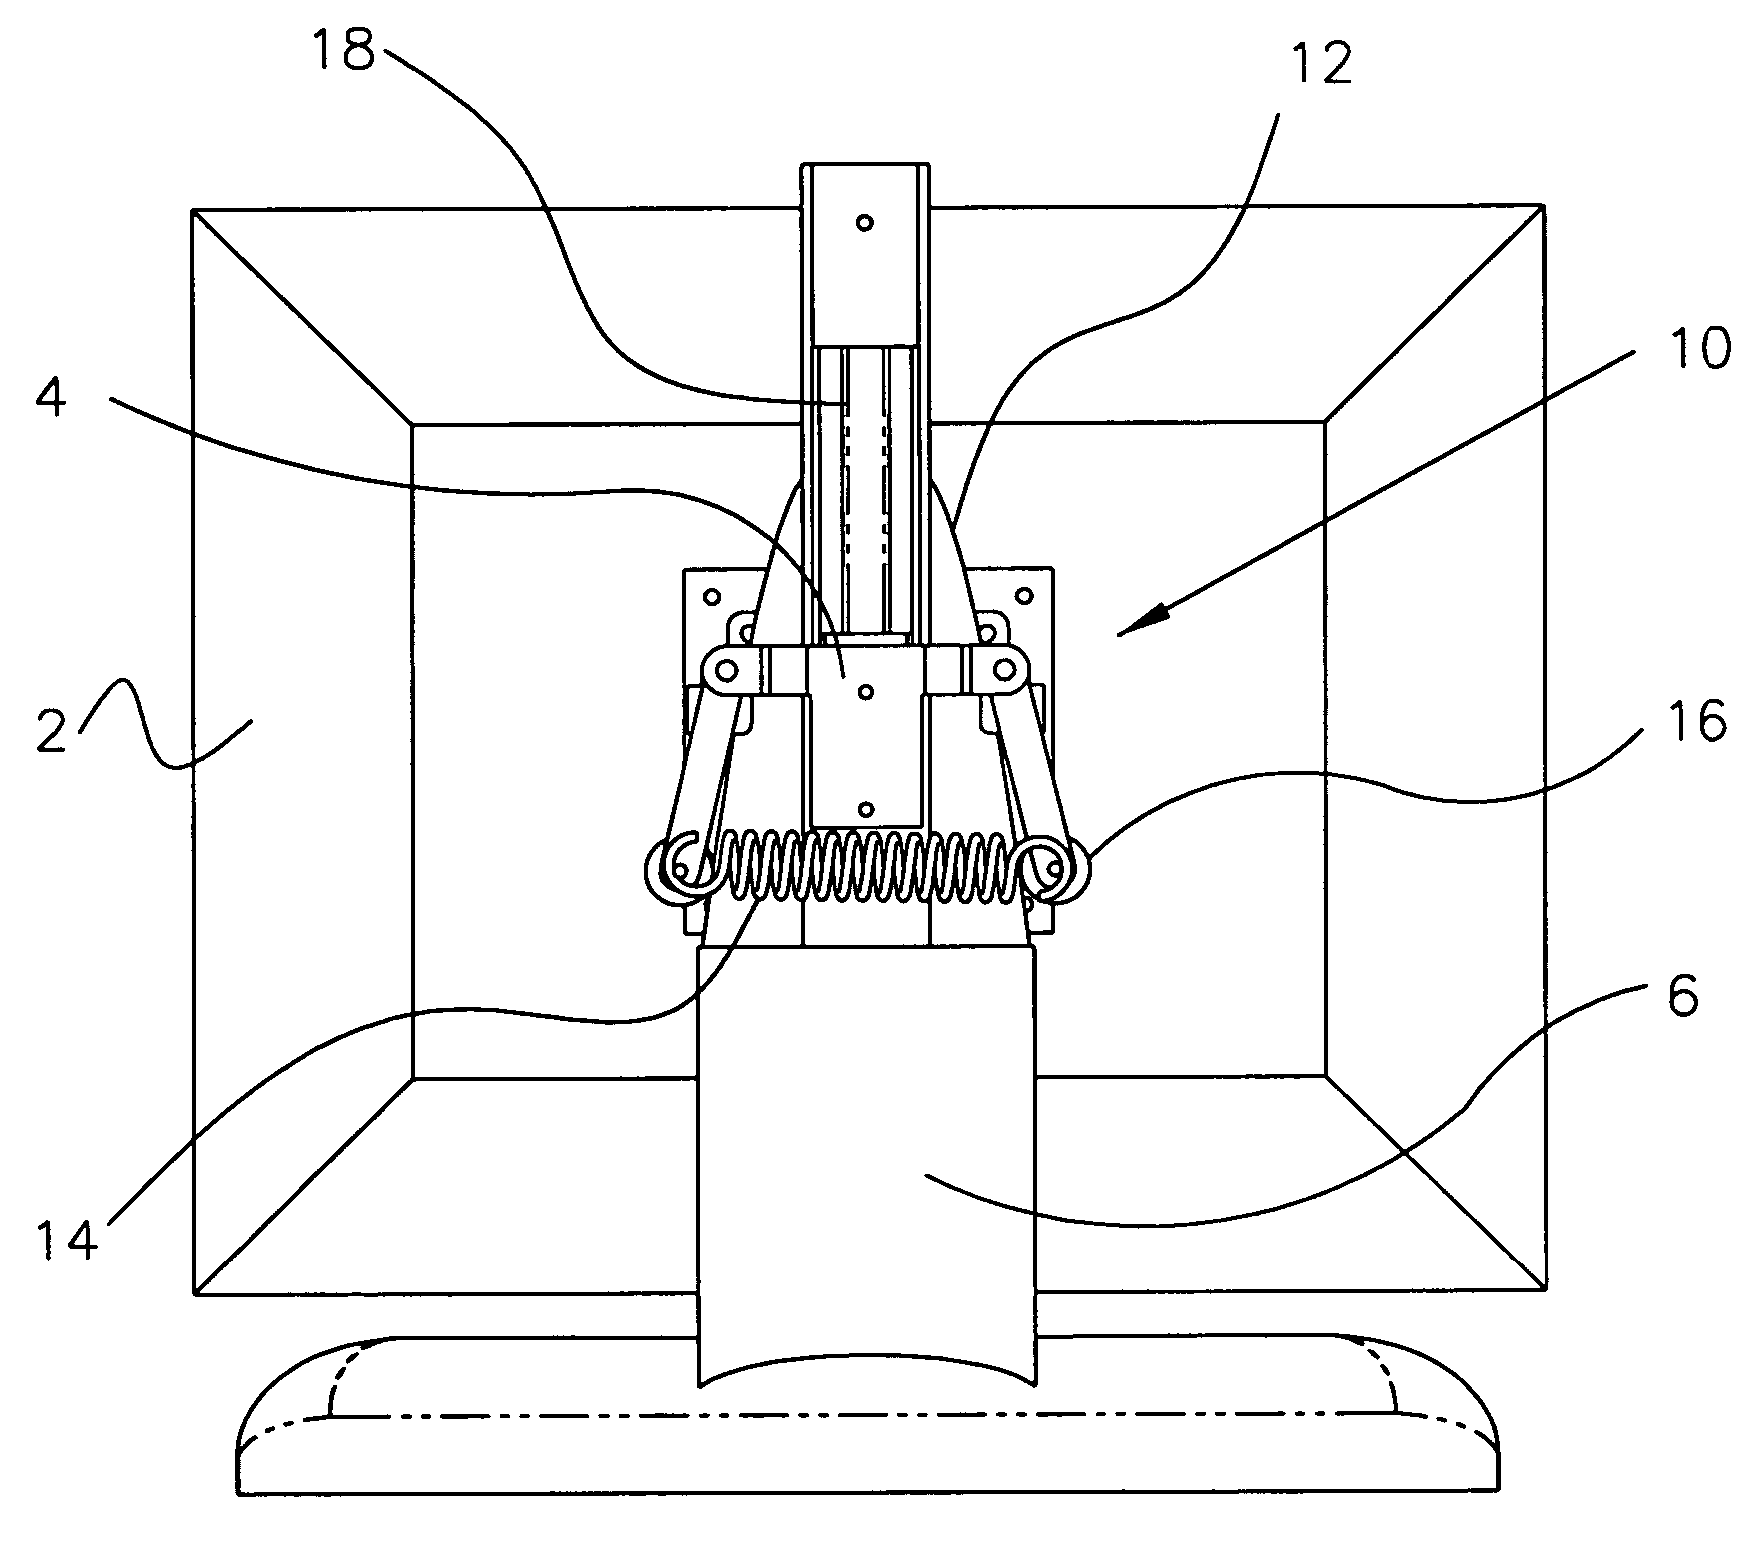 Methods and apparatus for generating force and torque